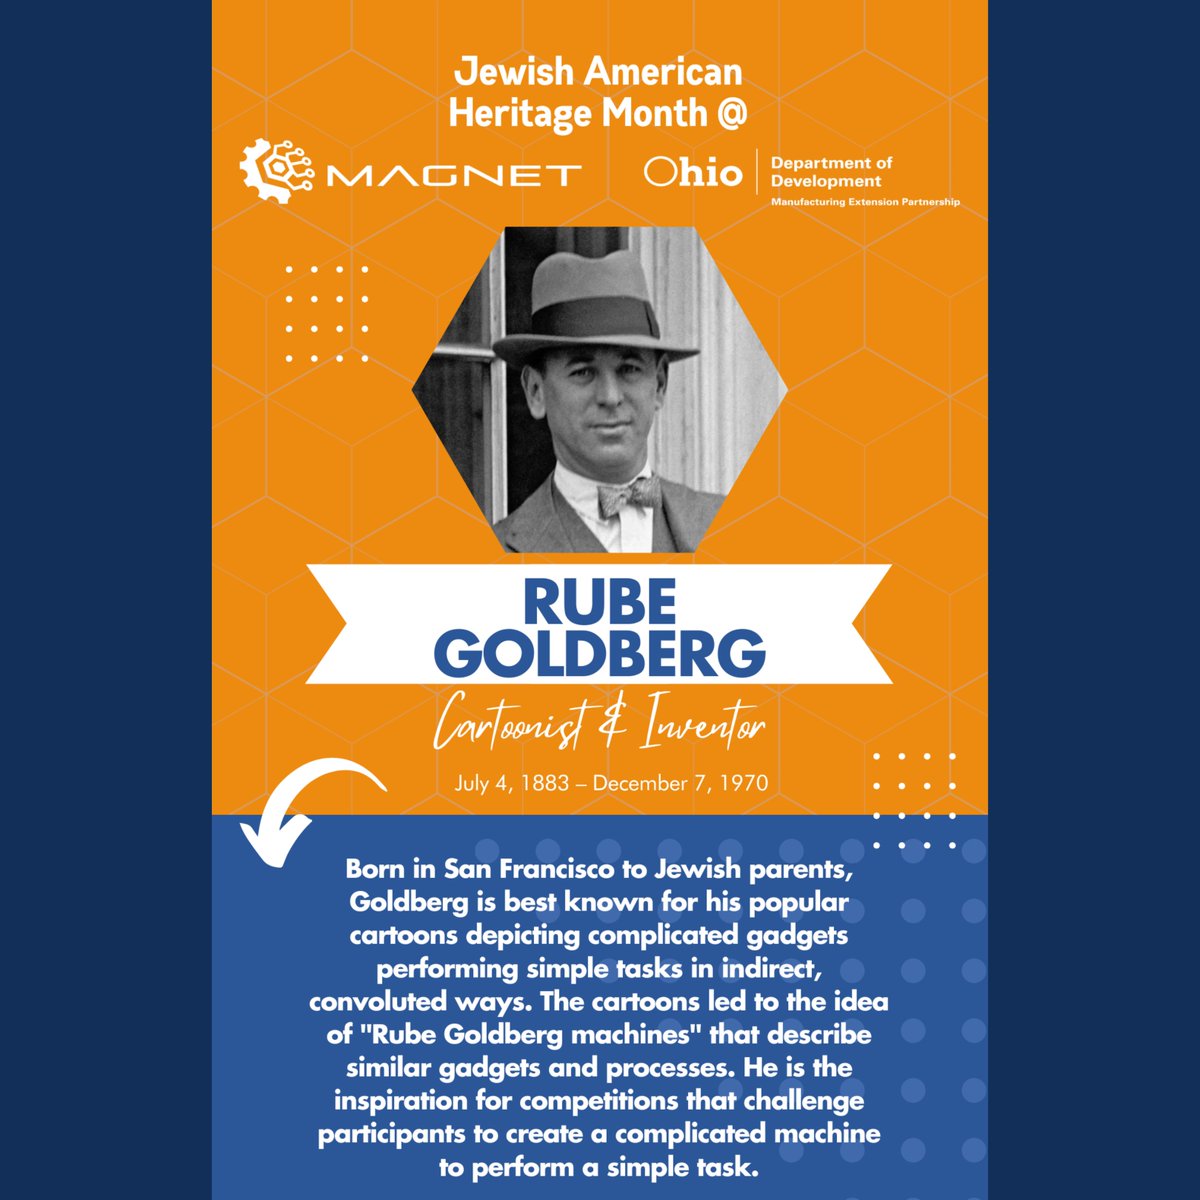 📝Comment if you've ever created a Rube Goldberg machine. What were you trying to do? During #JewishAmericanHeritageMonth, we celebrate Rube Goldberg, as without his innovation, we wouldn't have the crazy #chainreaction entertainment we have all come to love. @MAGNETOhio